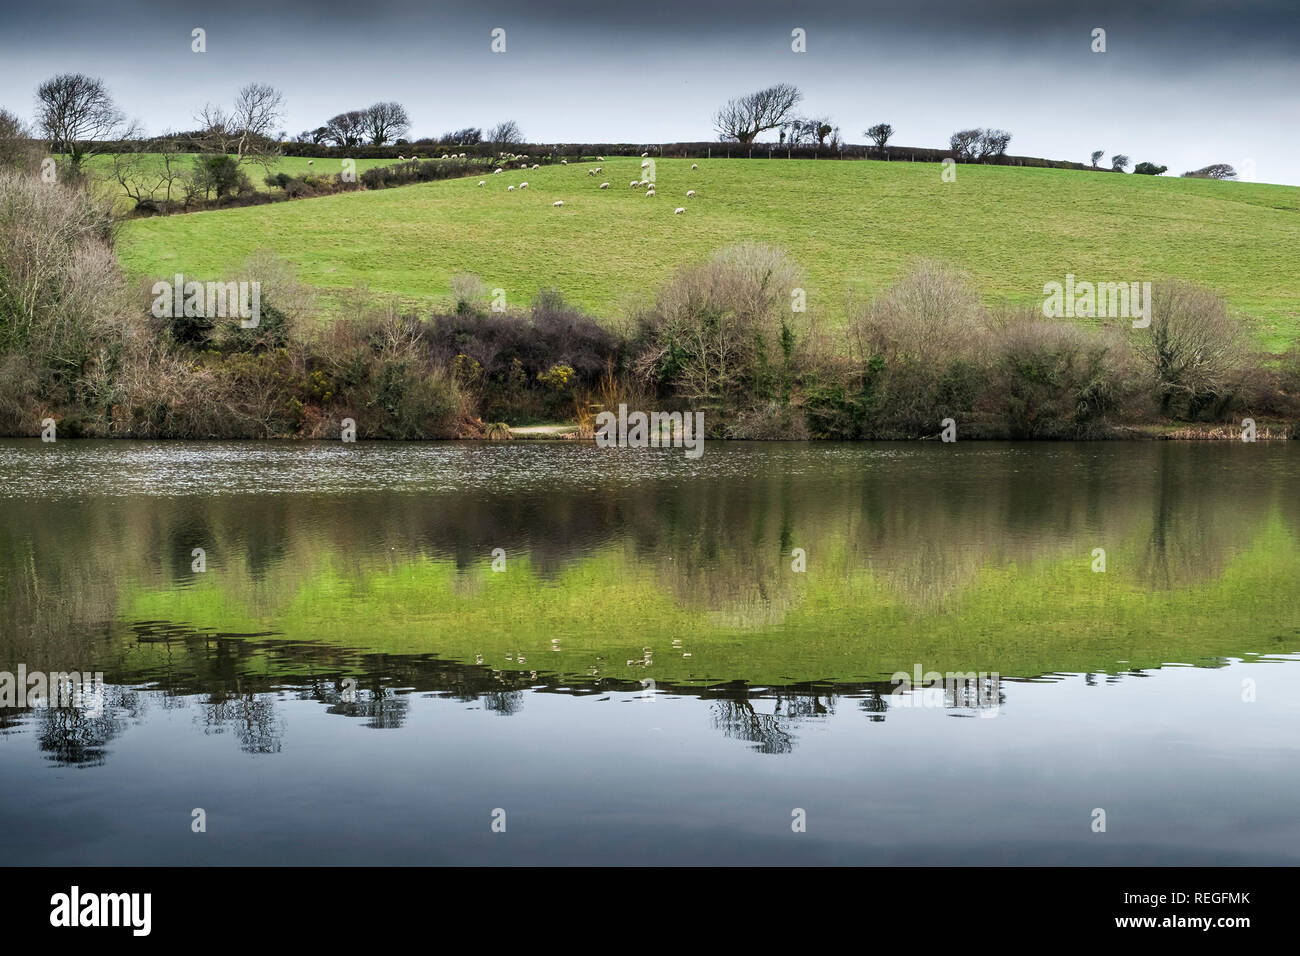 Reflection in the still water in Porth reservoir in Cornwall. Stock Photo